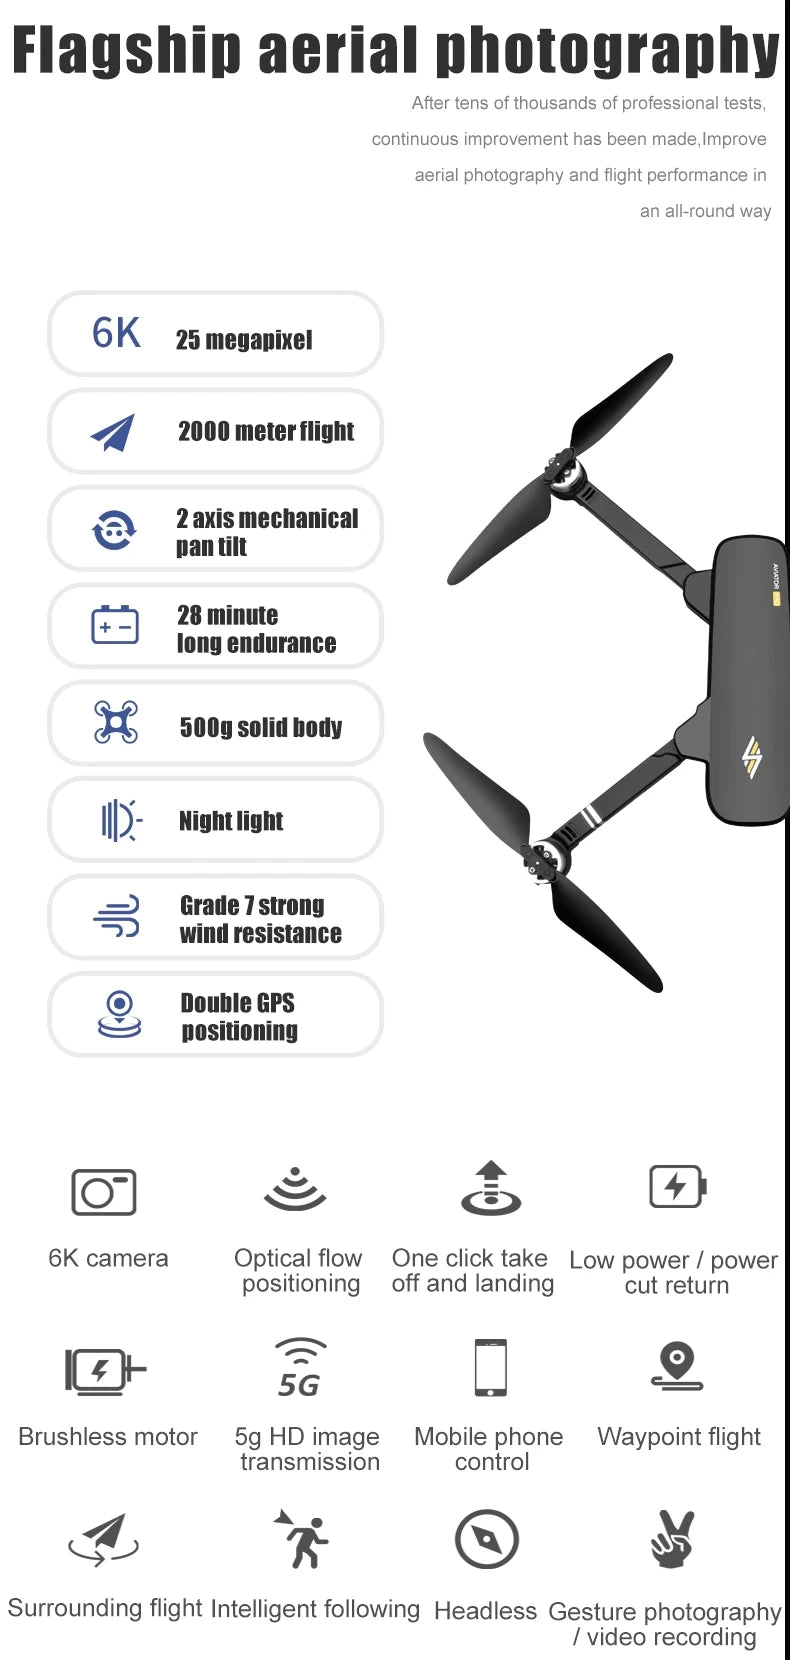 8811 Pro Drone, after tens of thousands of professional tests, continuous improvement has been